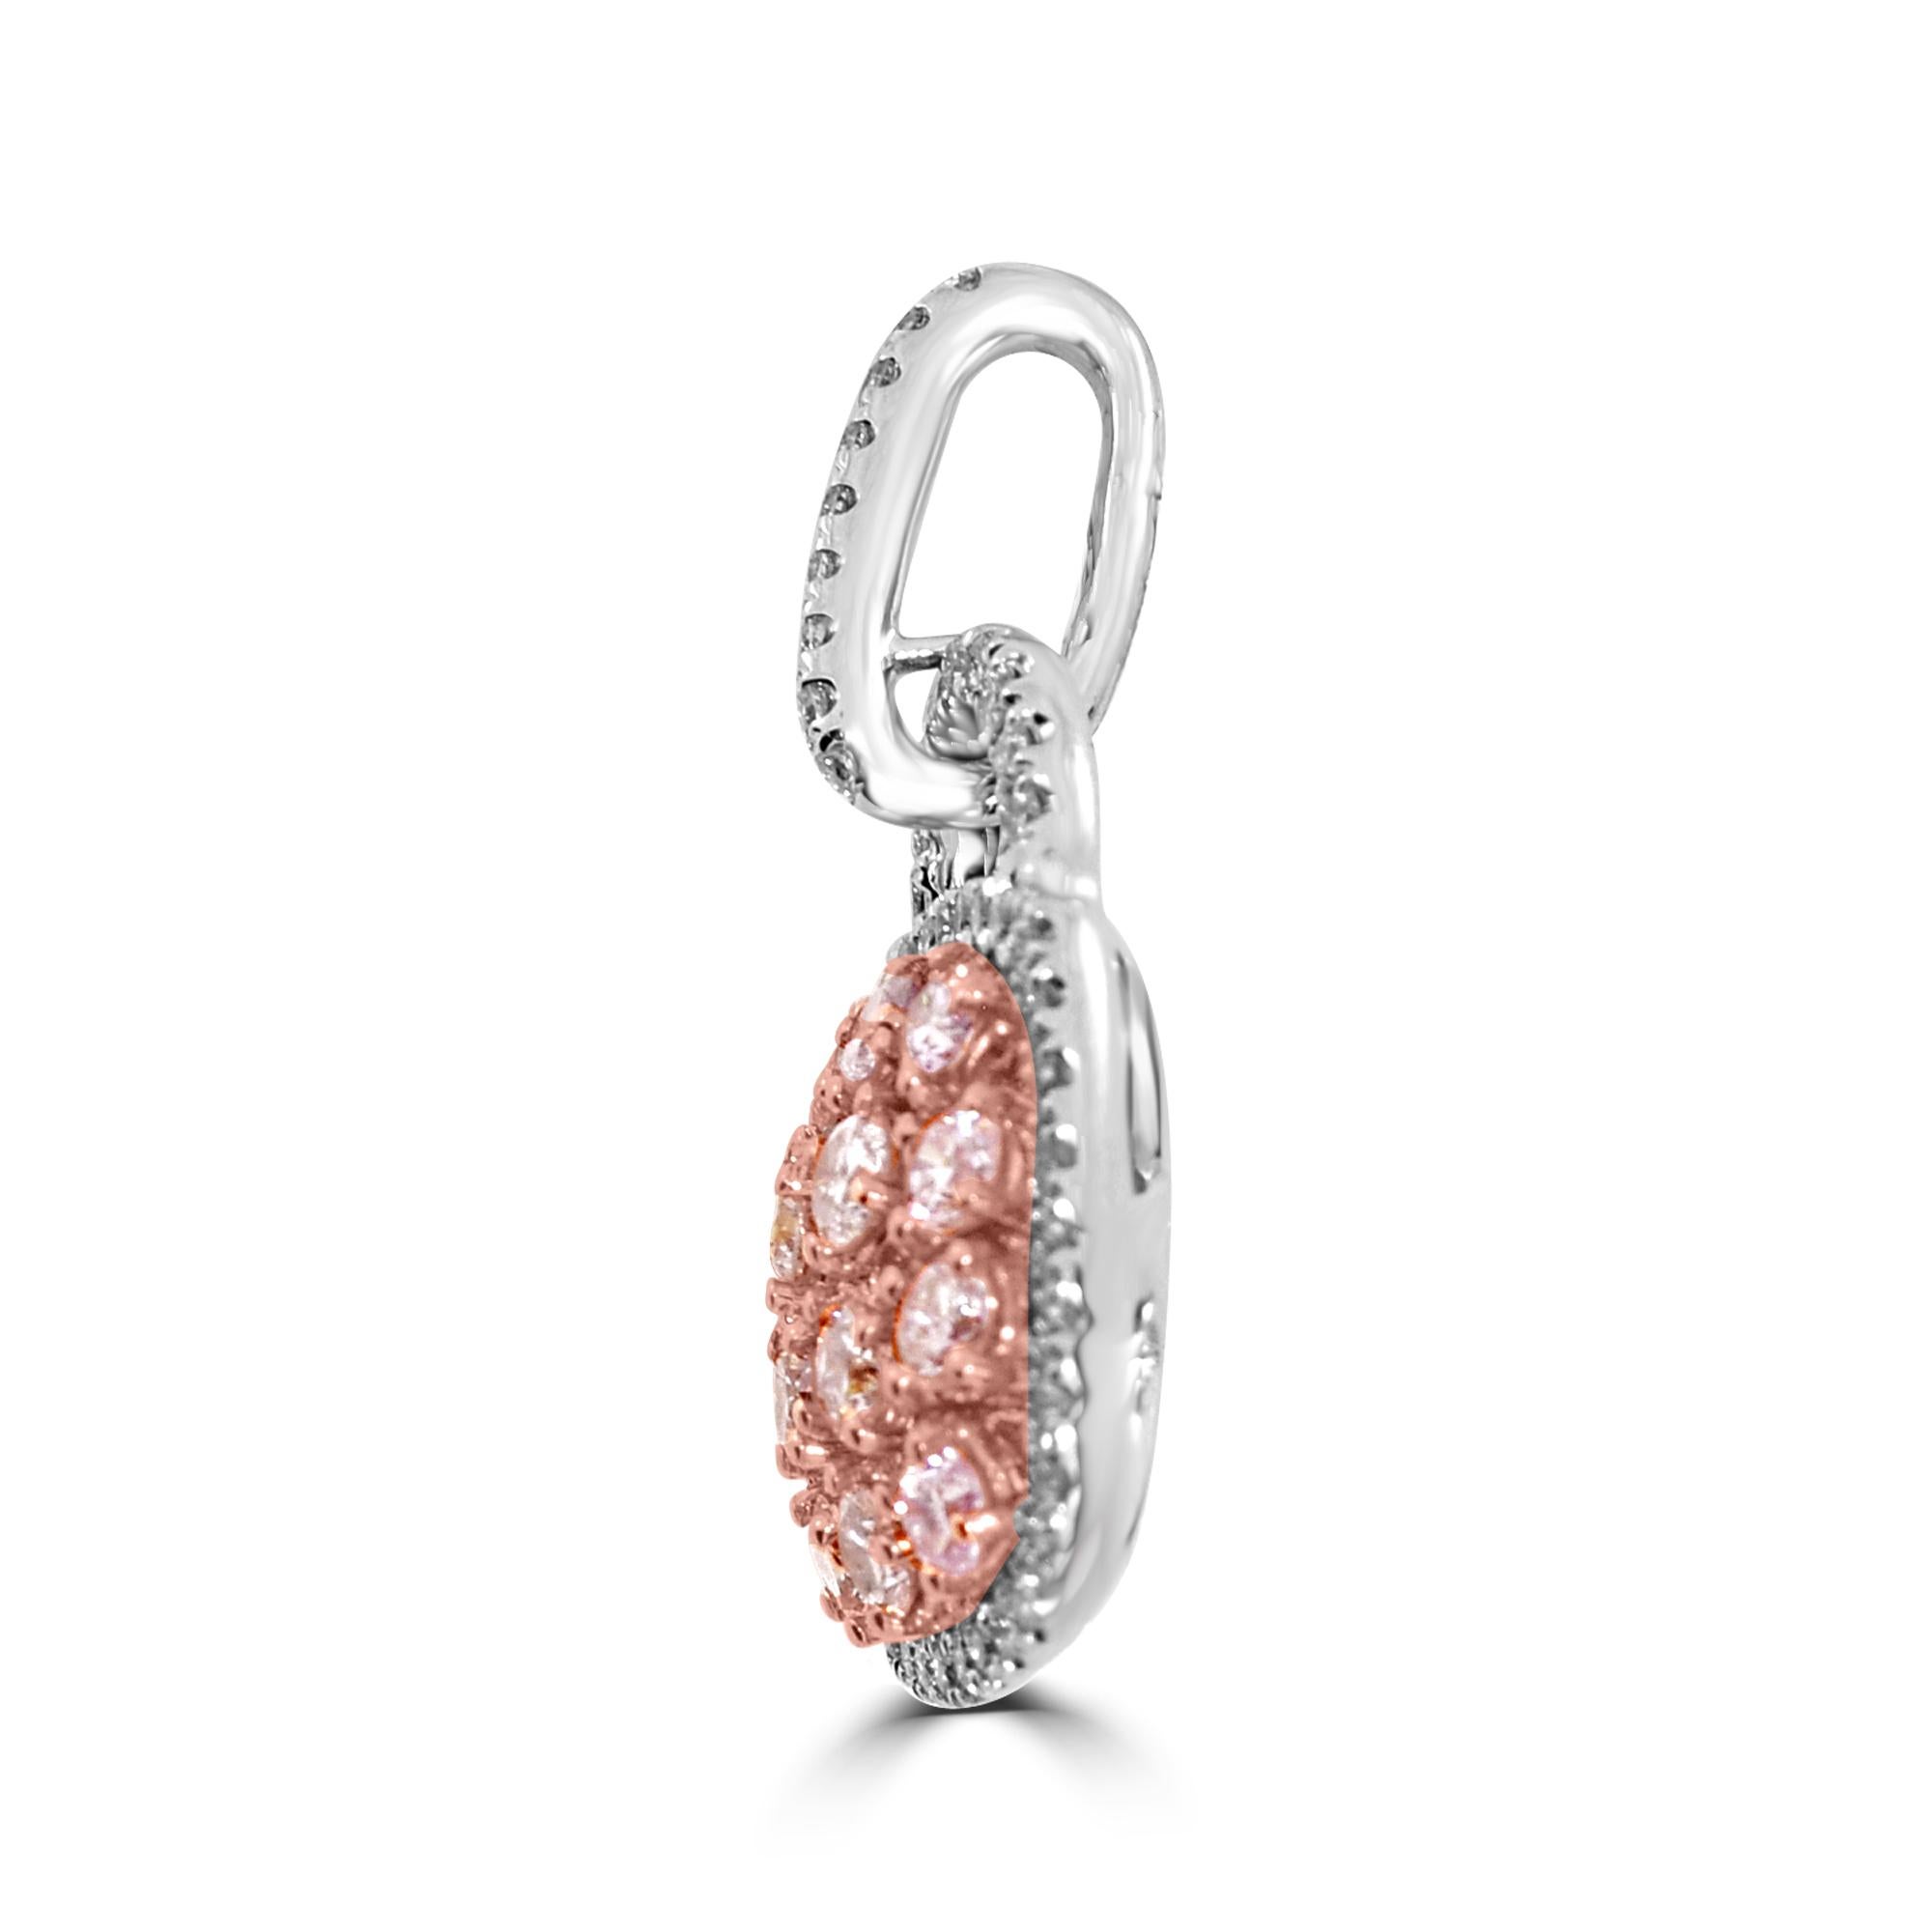 Dainty and Stylish Natural Fancy Pink Diamond Purse Pendant 
Total Carat Weight: 1.30 Carat
Natural Fancy Pink Diamonds: 0.92 Carats (total 14 stones)   
White Diamonds: 0.38 Carats (total 50 stones)
Setting 4.30 grams, 18k Rose, and White Gold